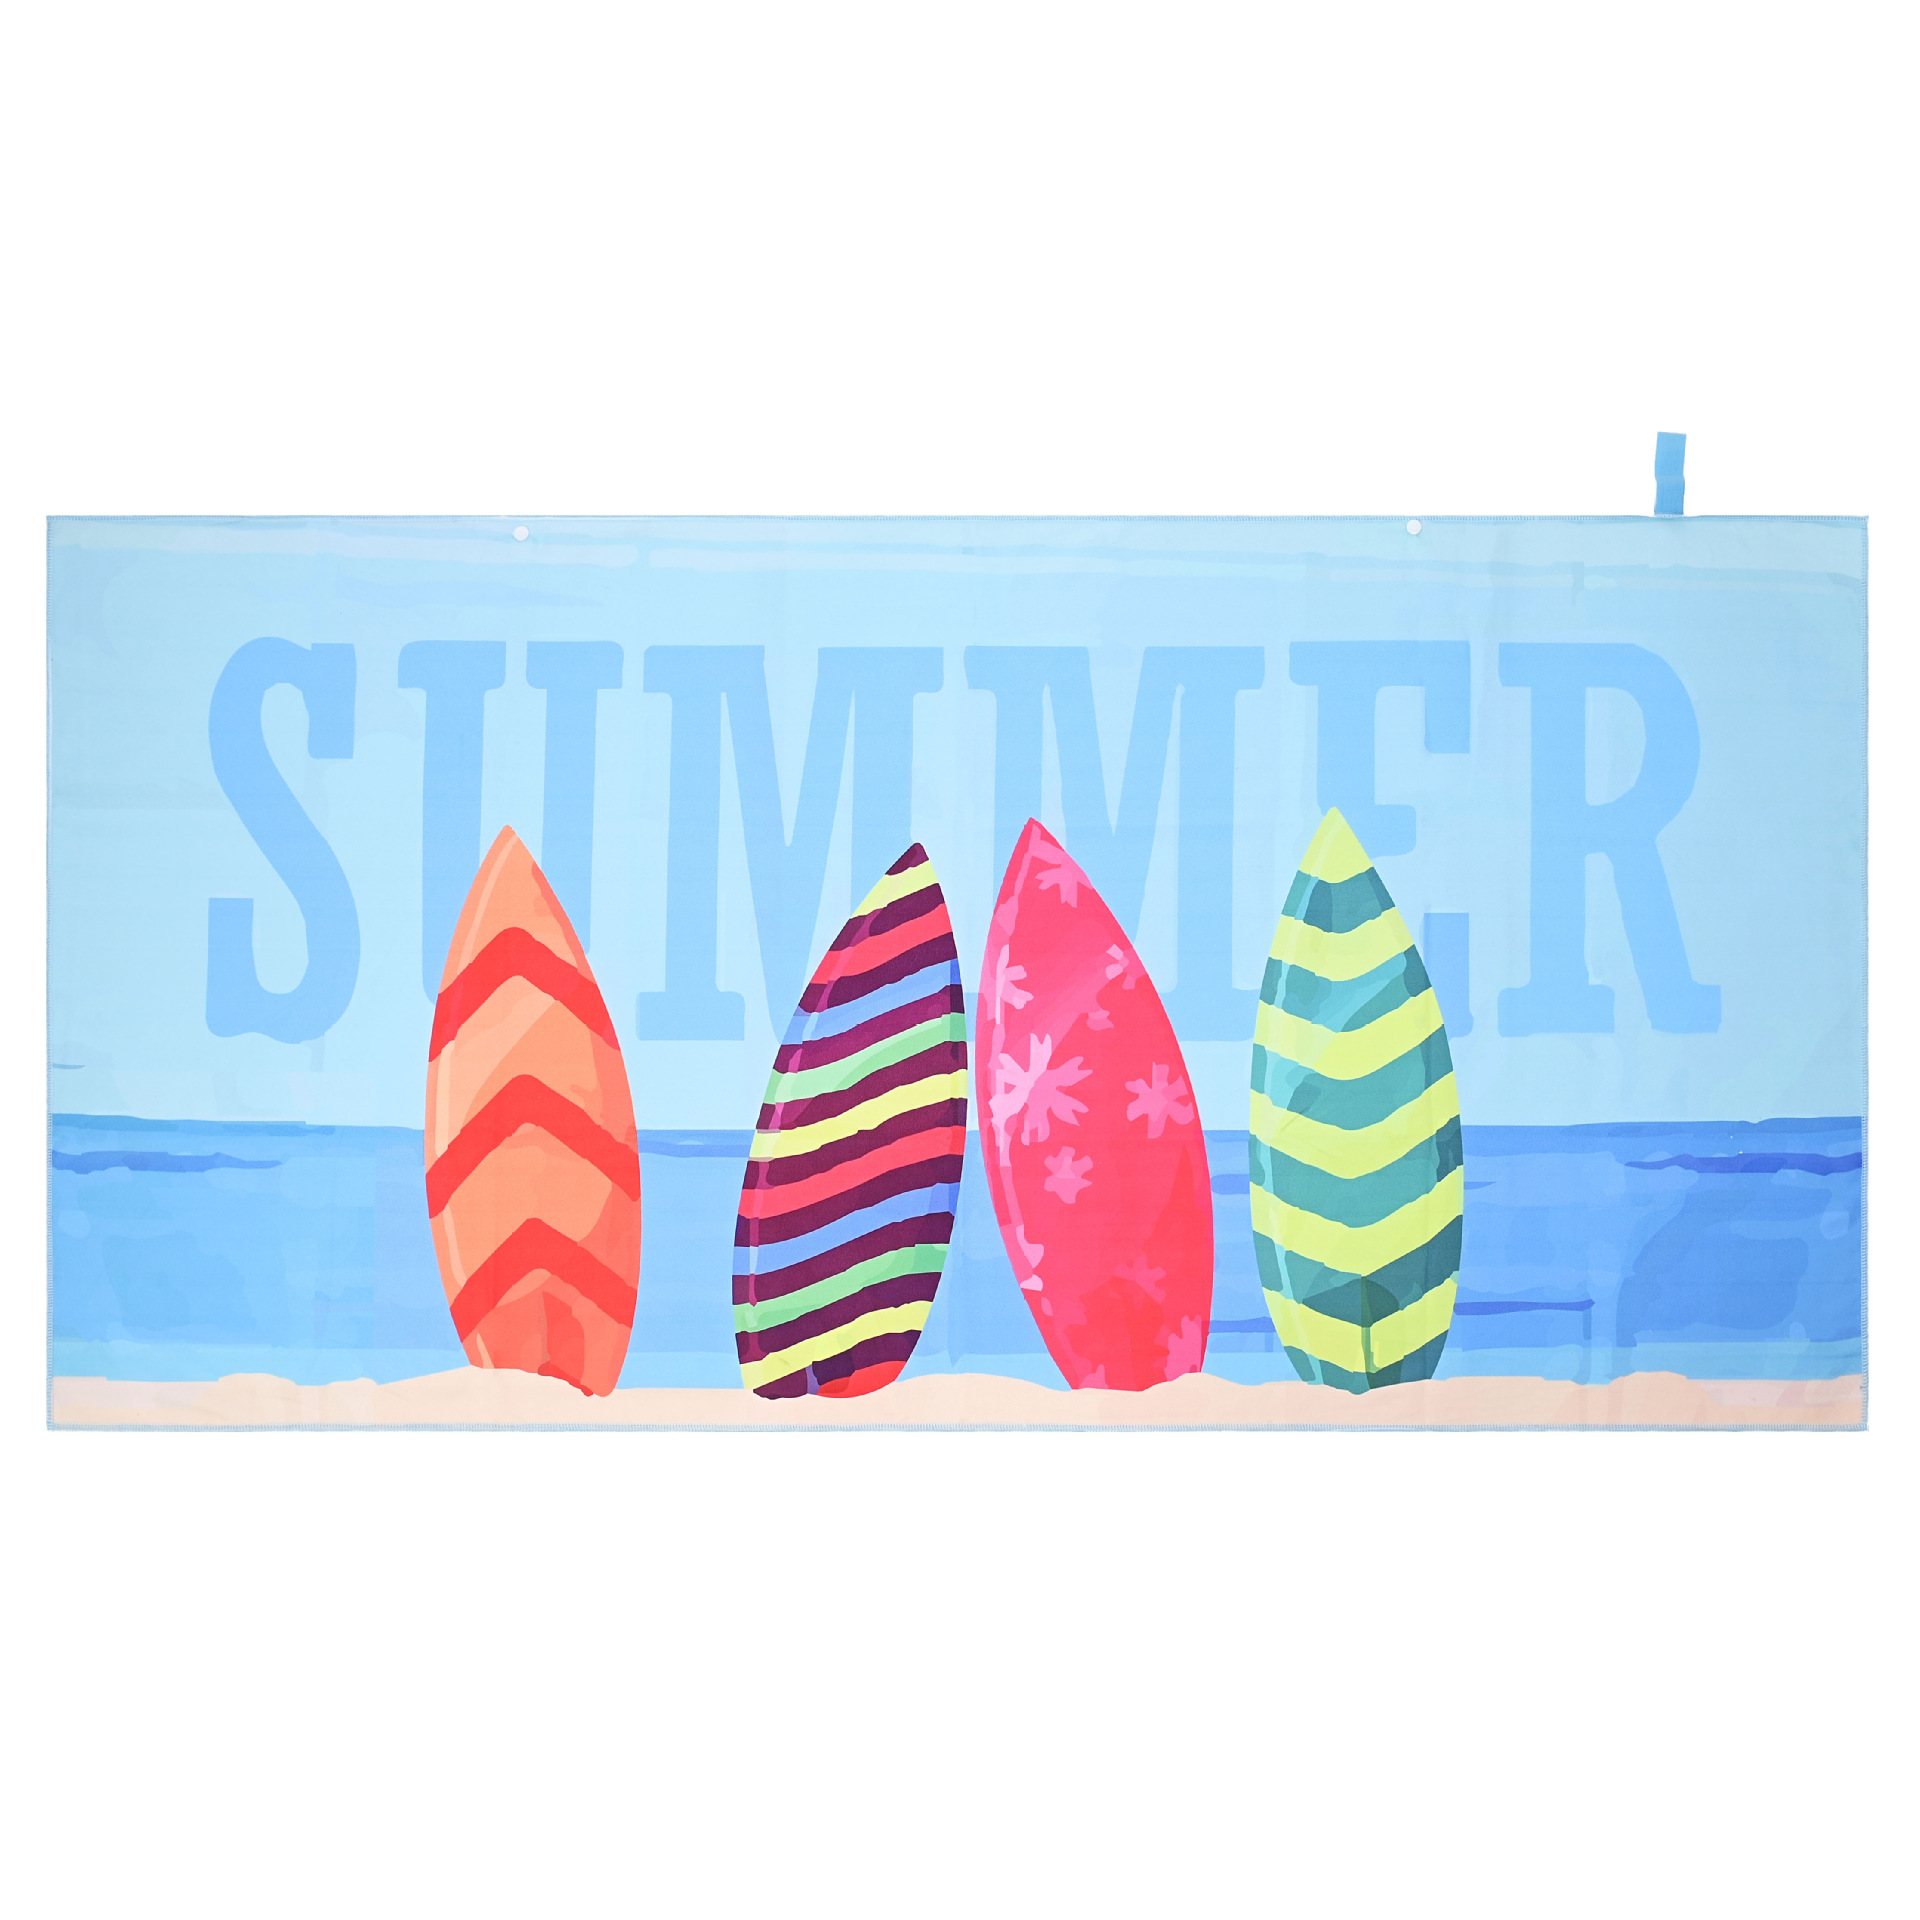 Double-Sided Velvet Printed Bath Towel Factory in Stock Wholesale Reactive Digital Printing Adult Beach Portable Swimming Beach Towel